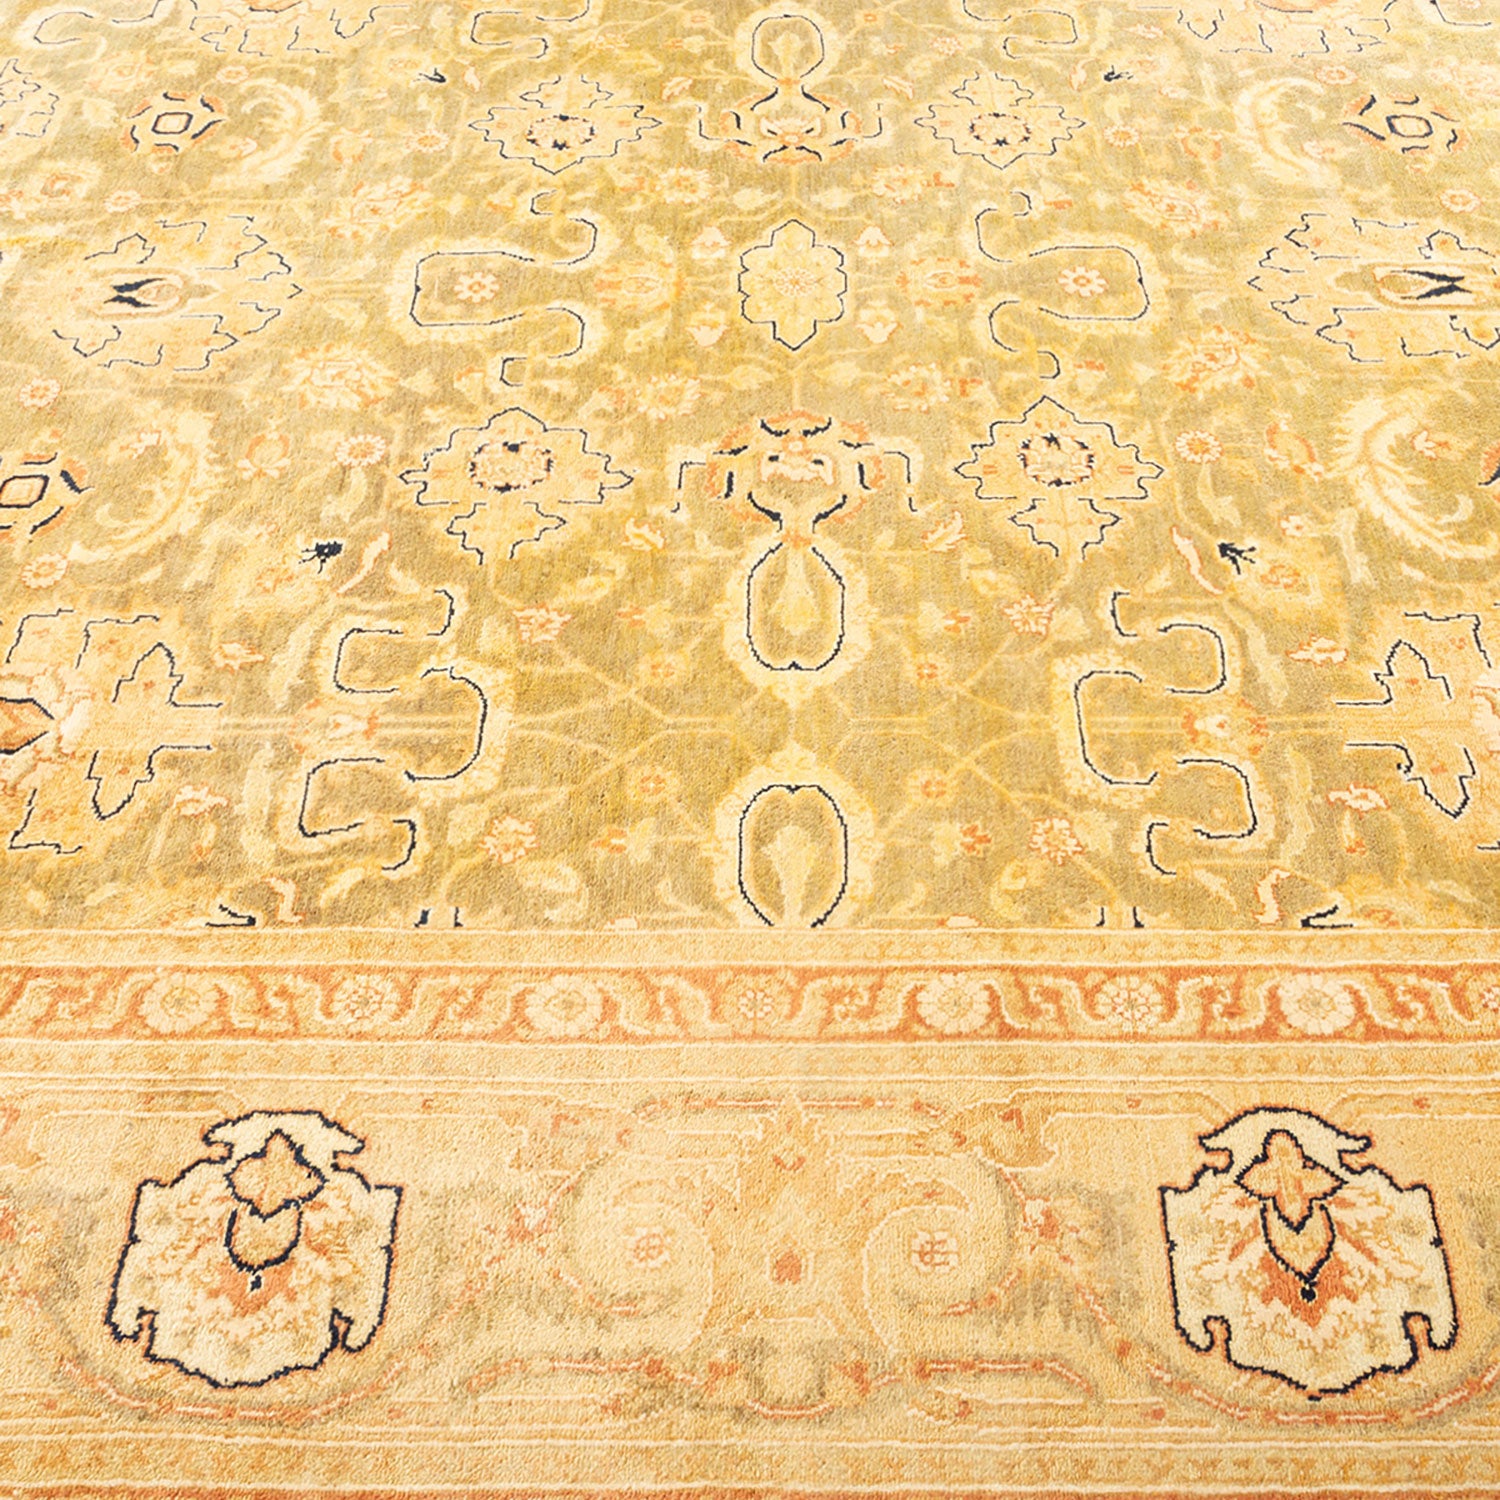 Intricate Persian carpet with symmetrical floral and geometric patterns.